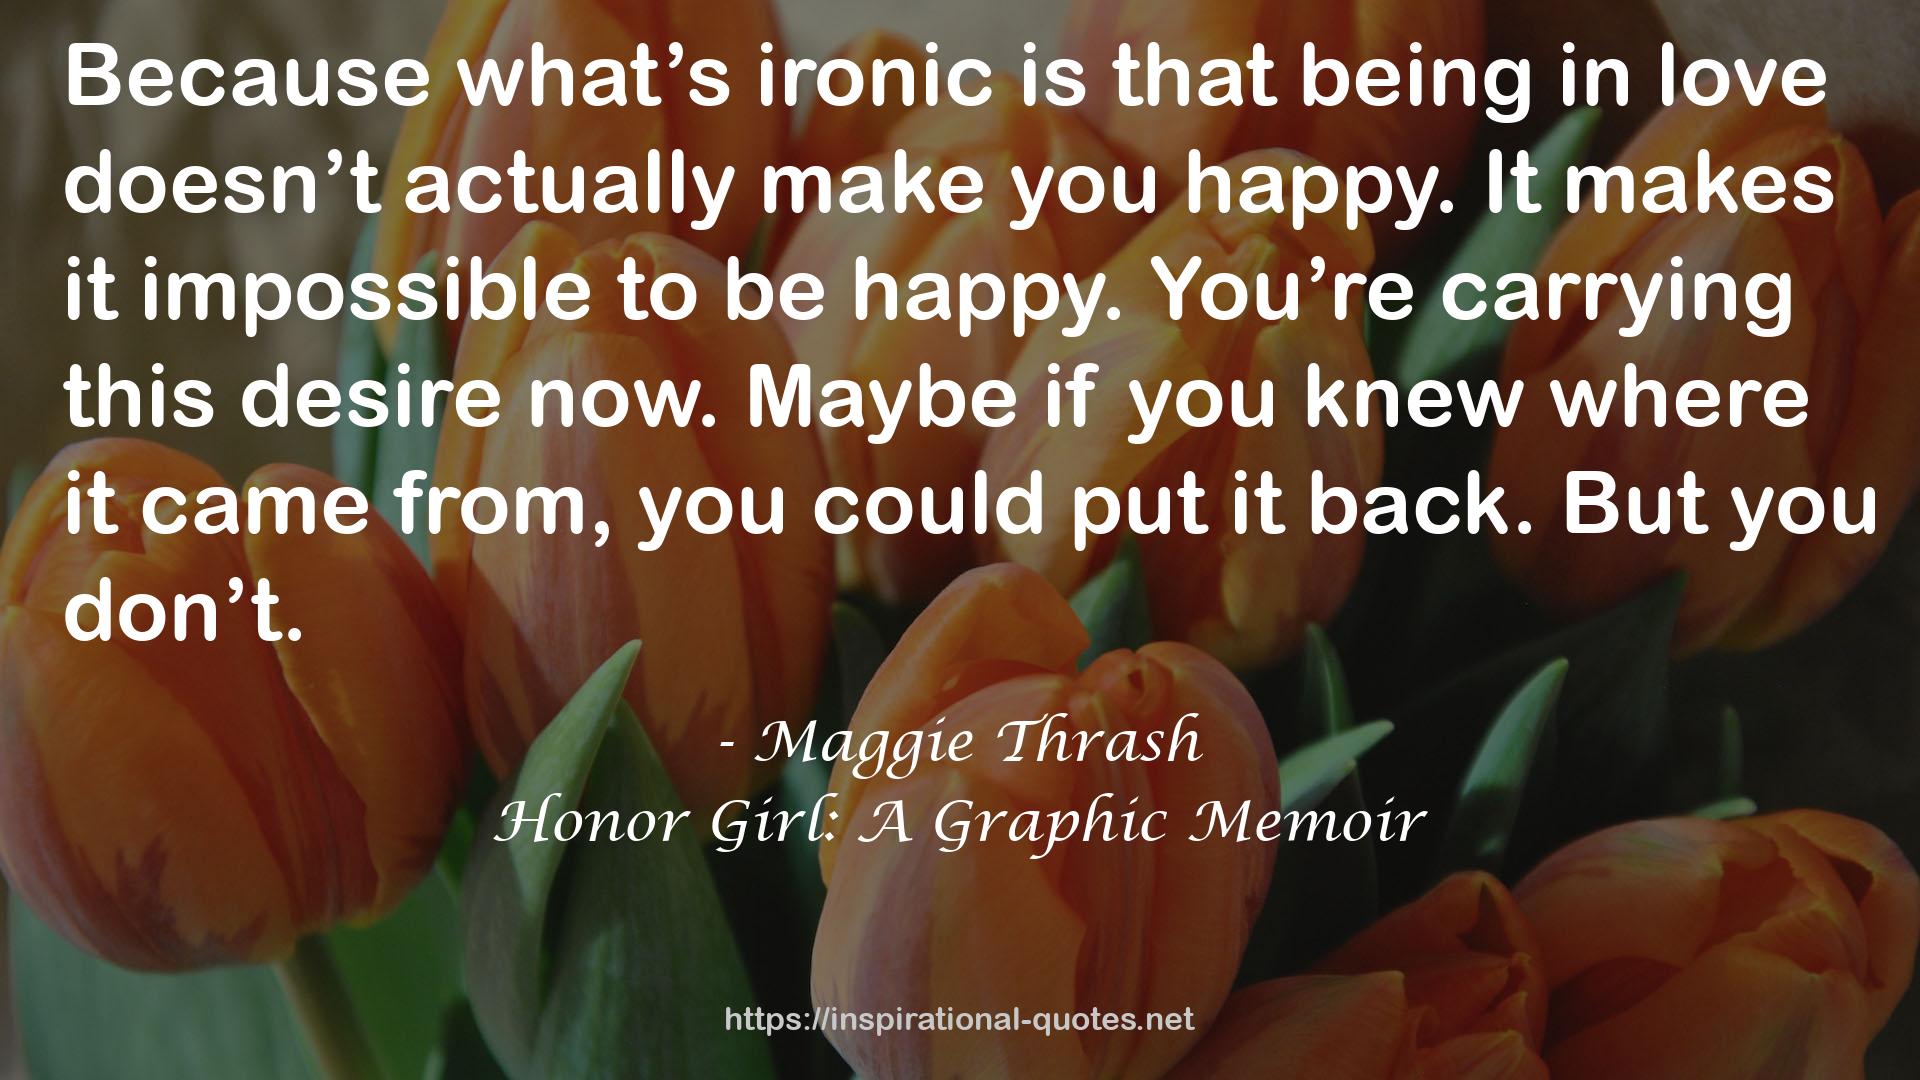 Honor Girl: A Graphic Memoir QUOTES